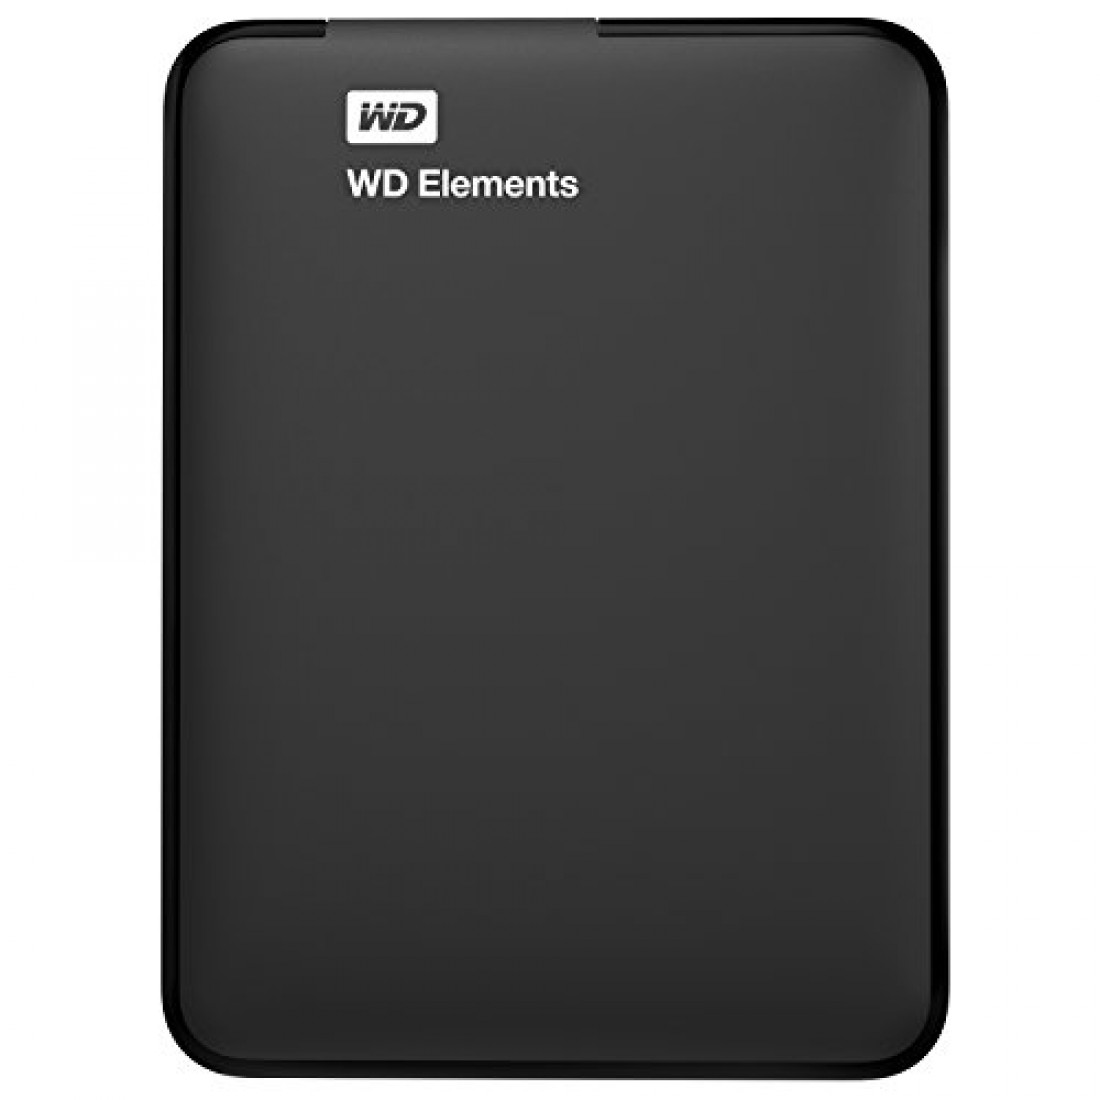 how to format a wd elements 2tb external hard drive for mac